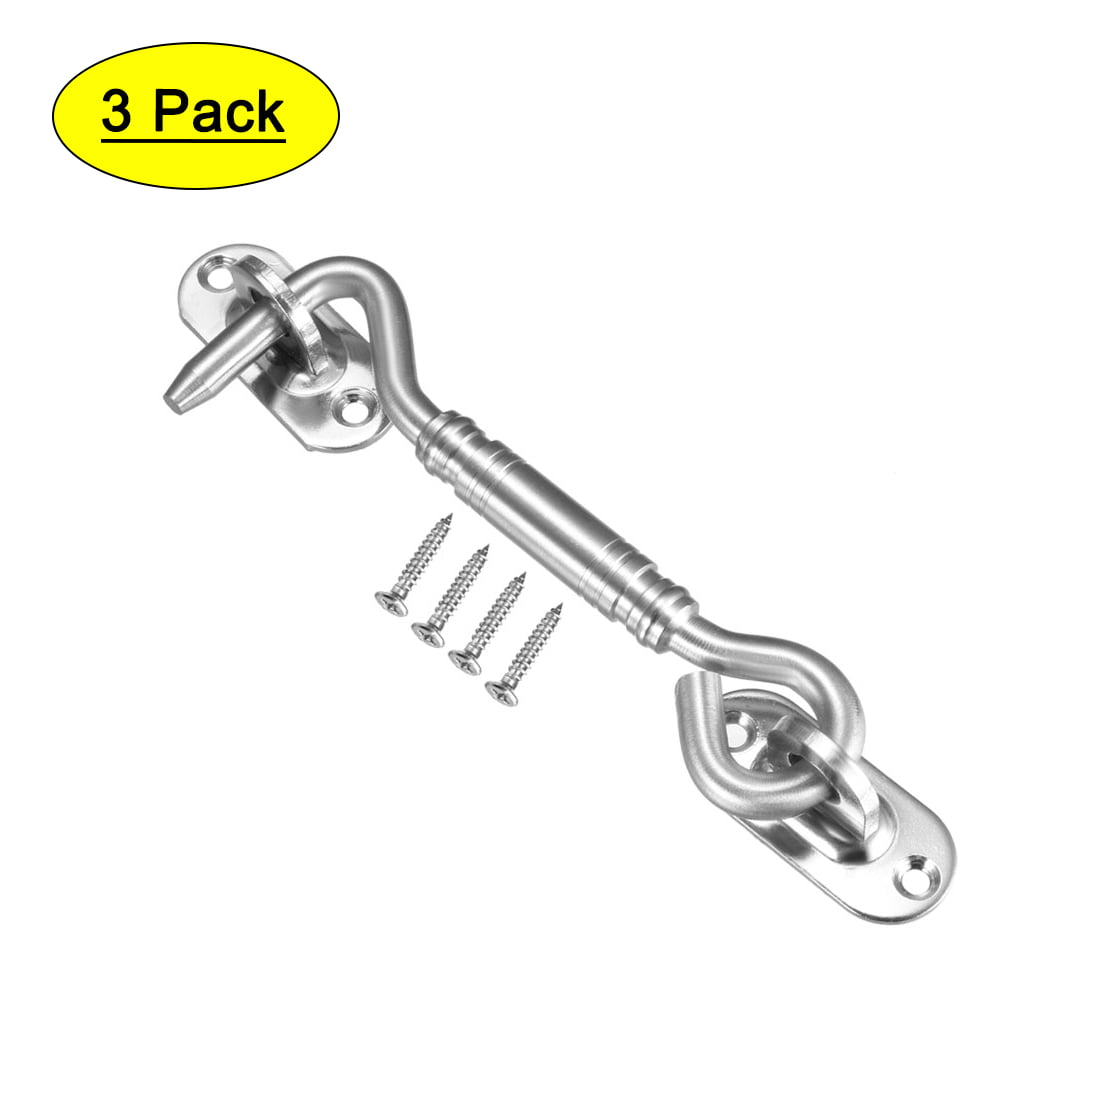 Your Choice 5 assorted Hook & Eye Screw Bolt Latches for gates Doors Cabinets 